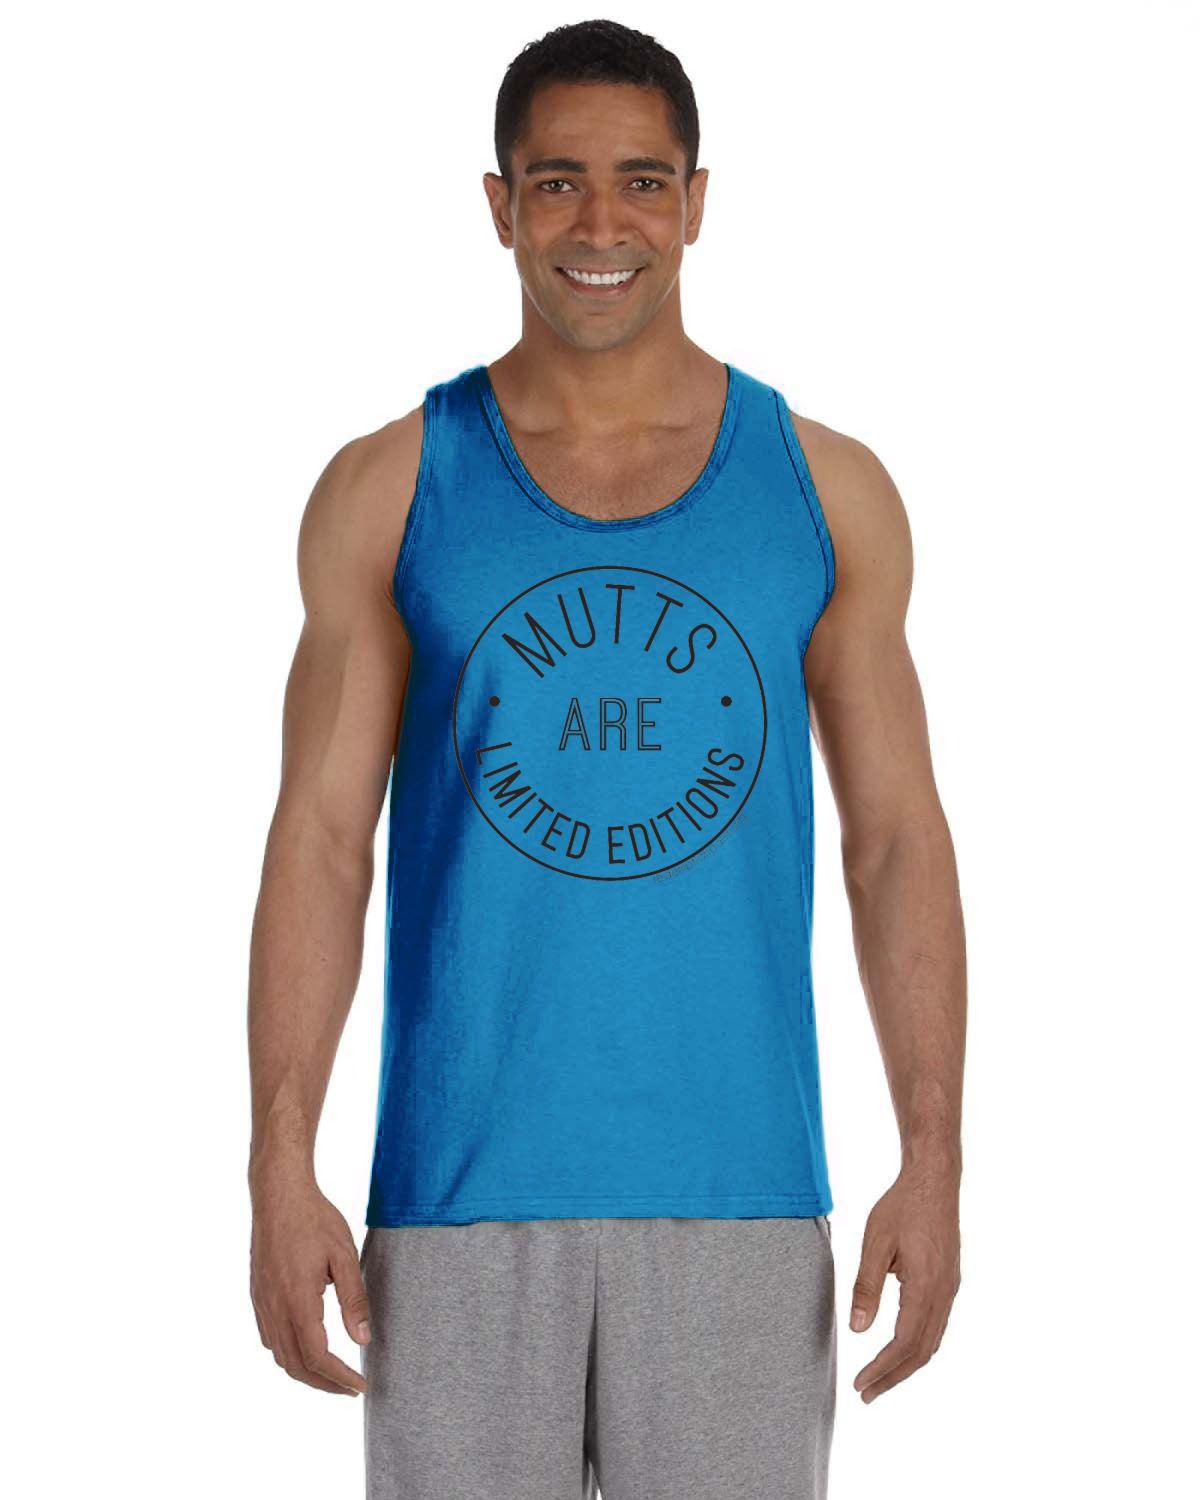 Mutts are Limited Edition Tank Top